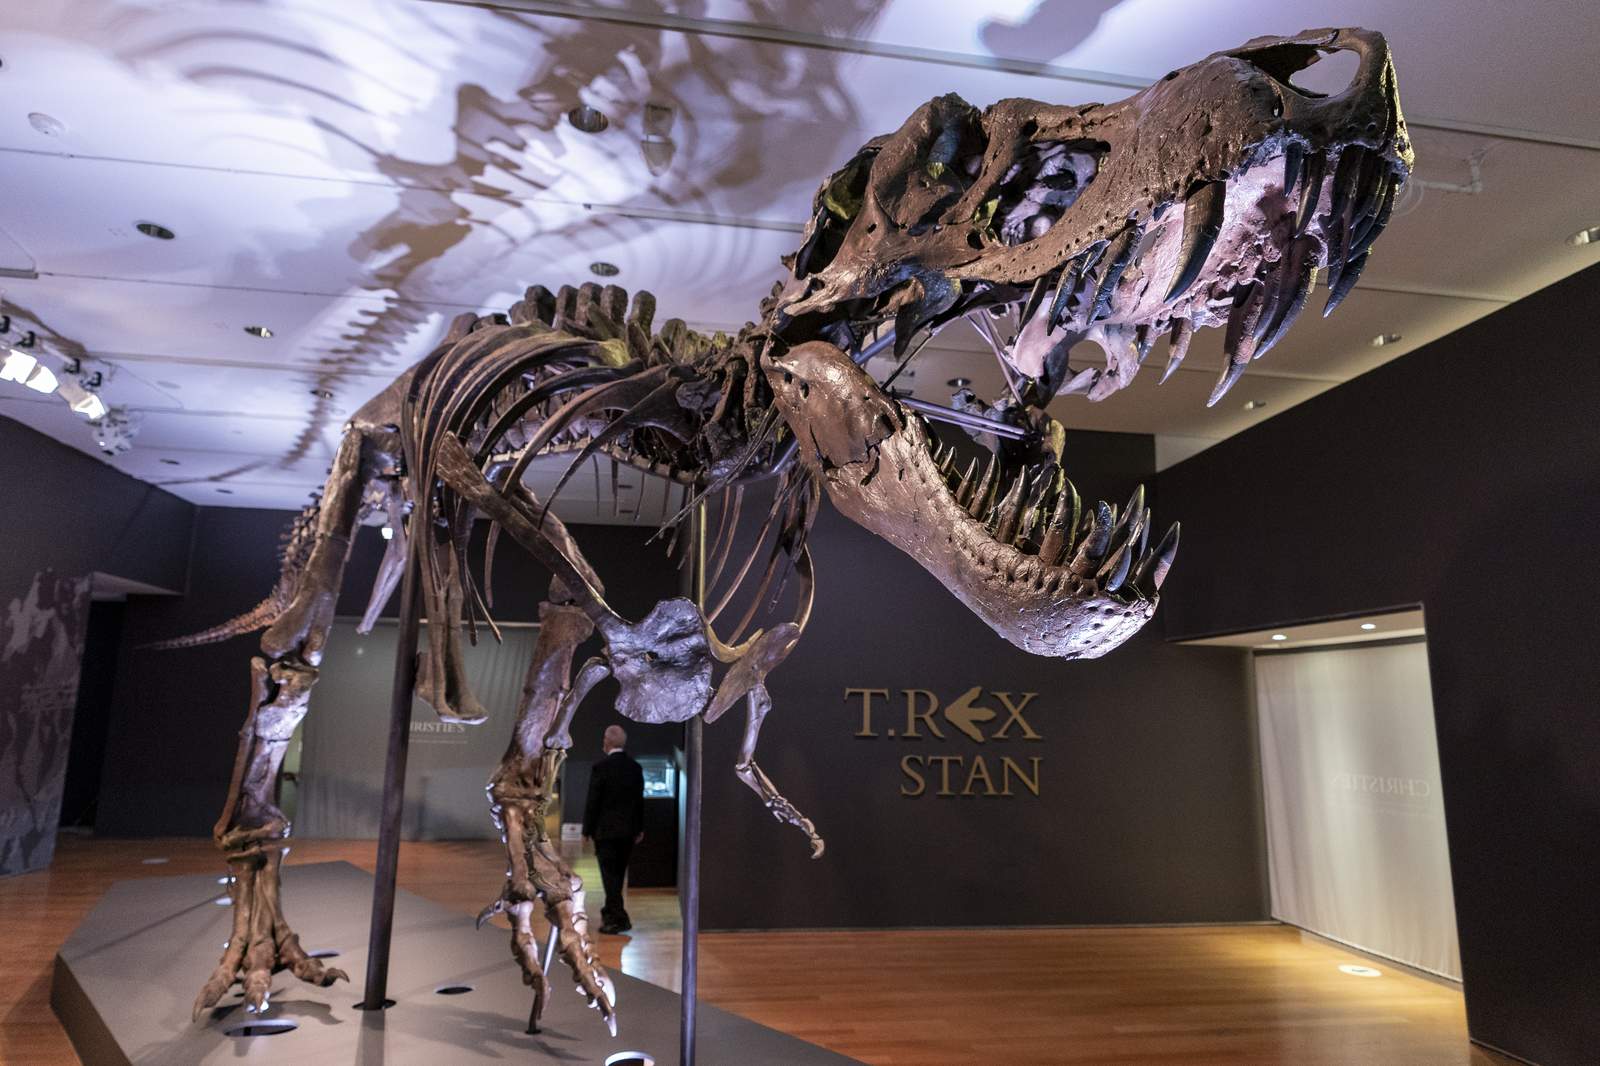 An auction house with good bones: Stan the T rex is for sale